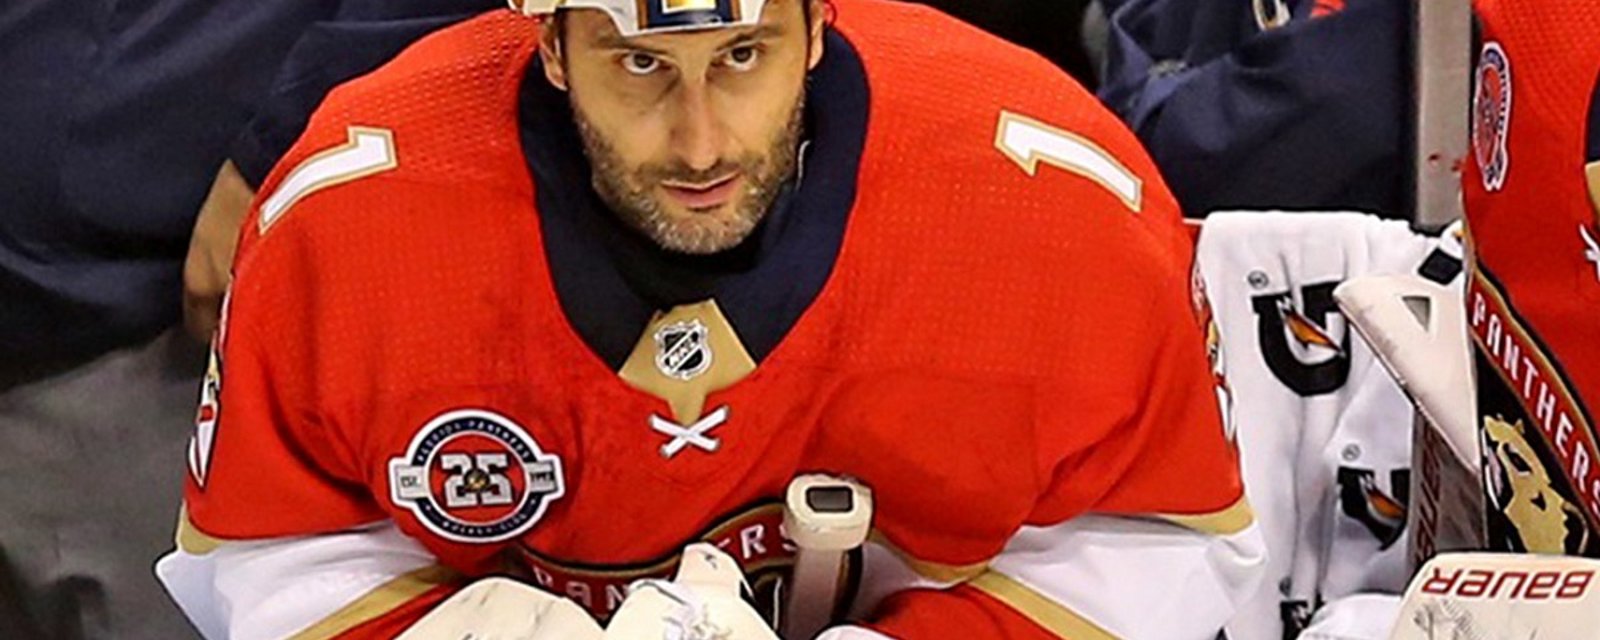 Roberto Luongo sadly forced to step away from his team.